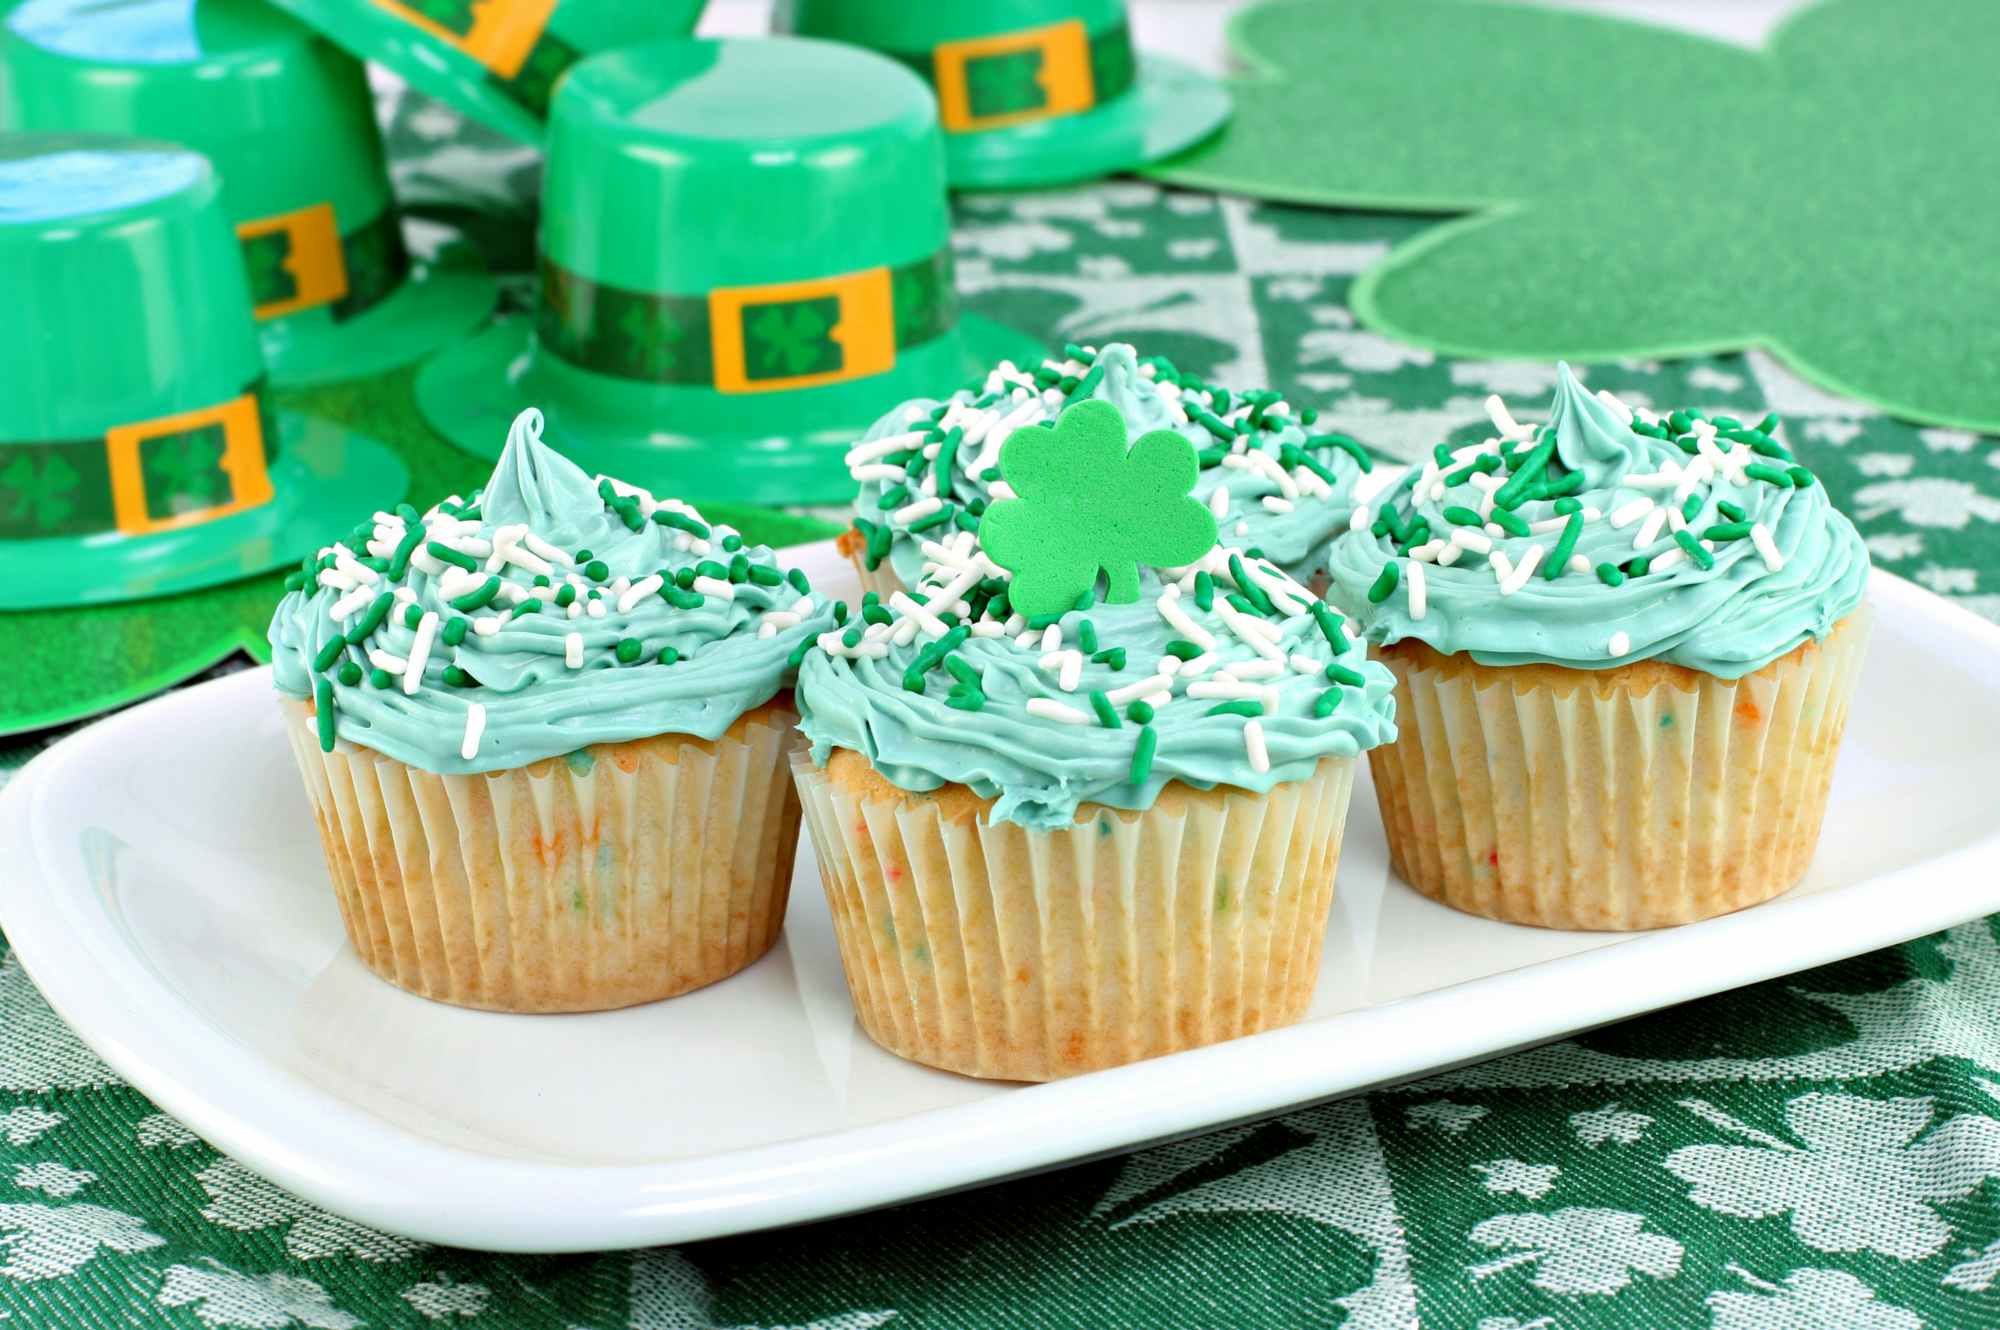 A plate of cupcakes decorated for St Patrick's Day